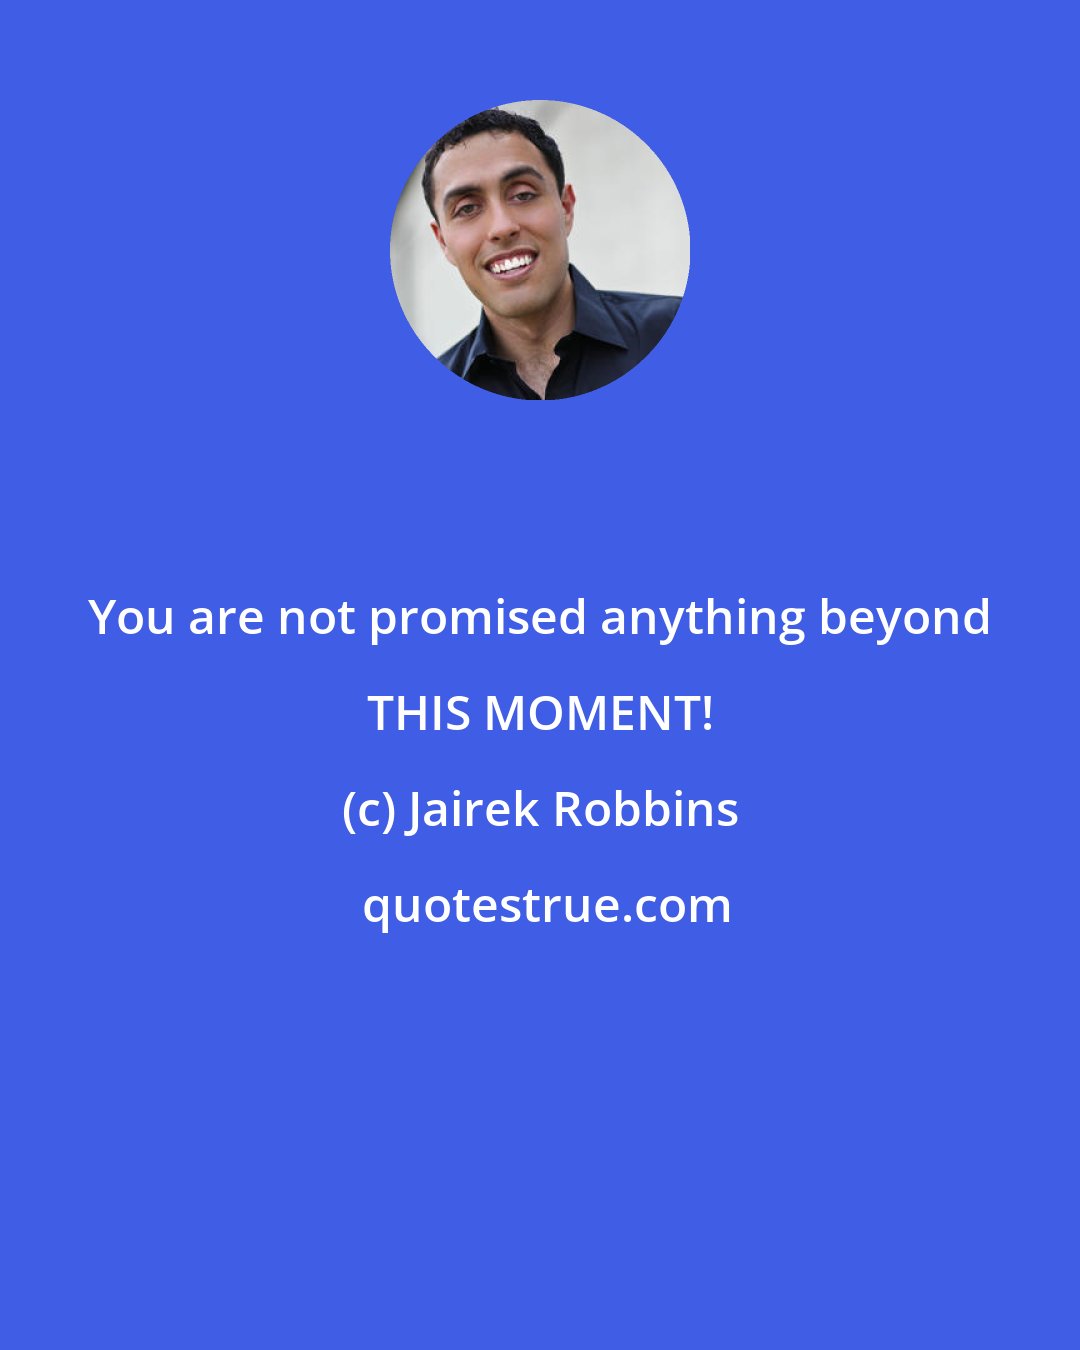 Jairek Robbins: You are not promised anything beyond THIS MOMENT!